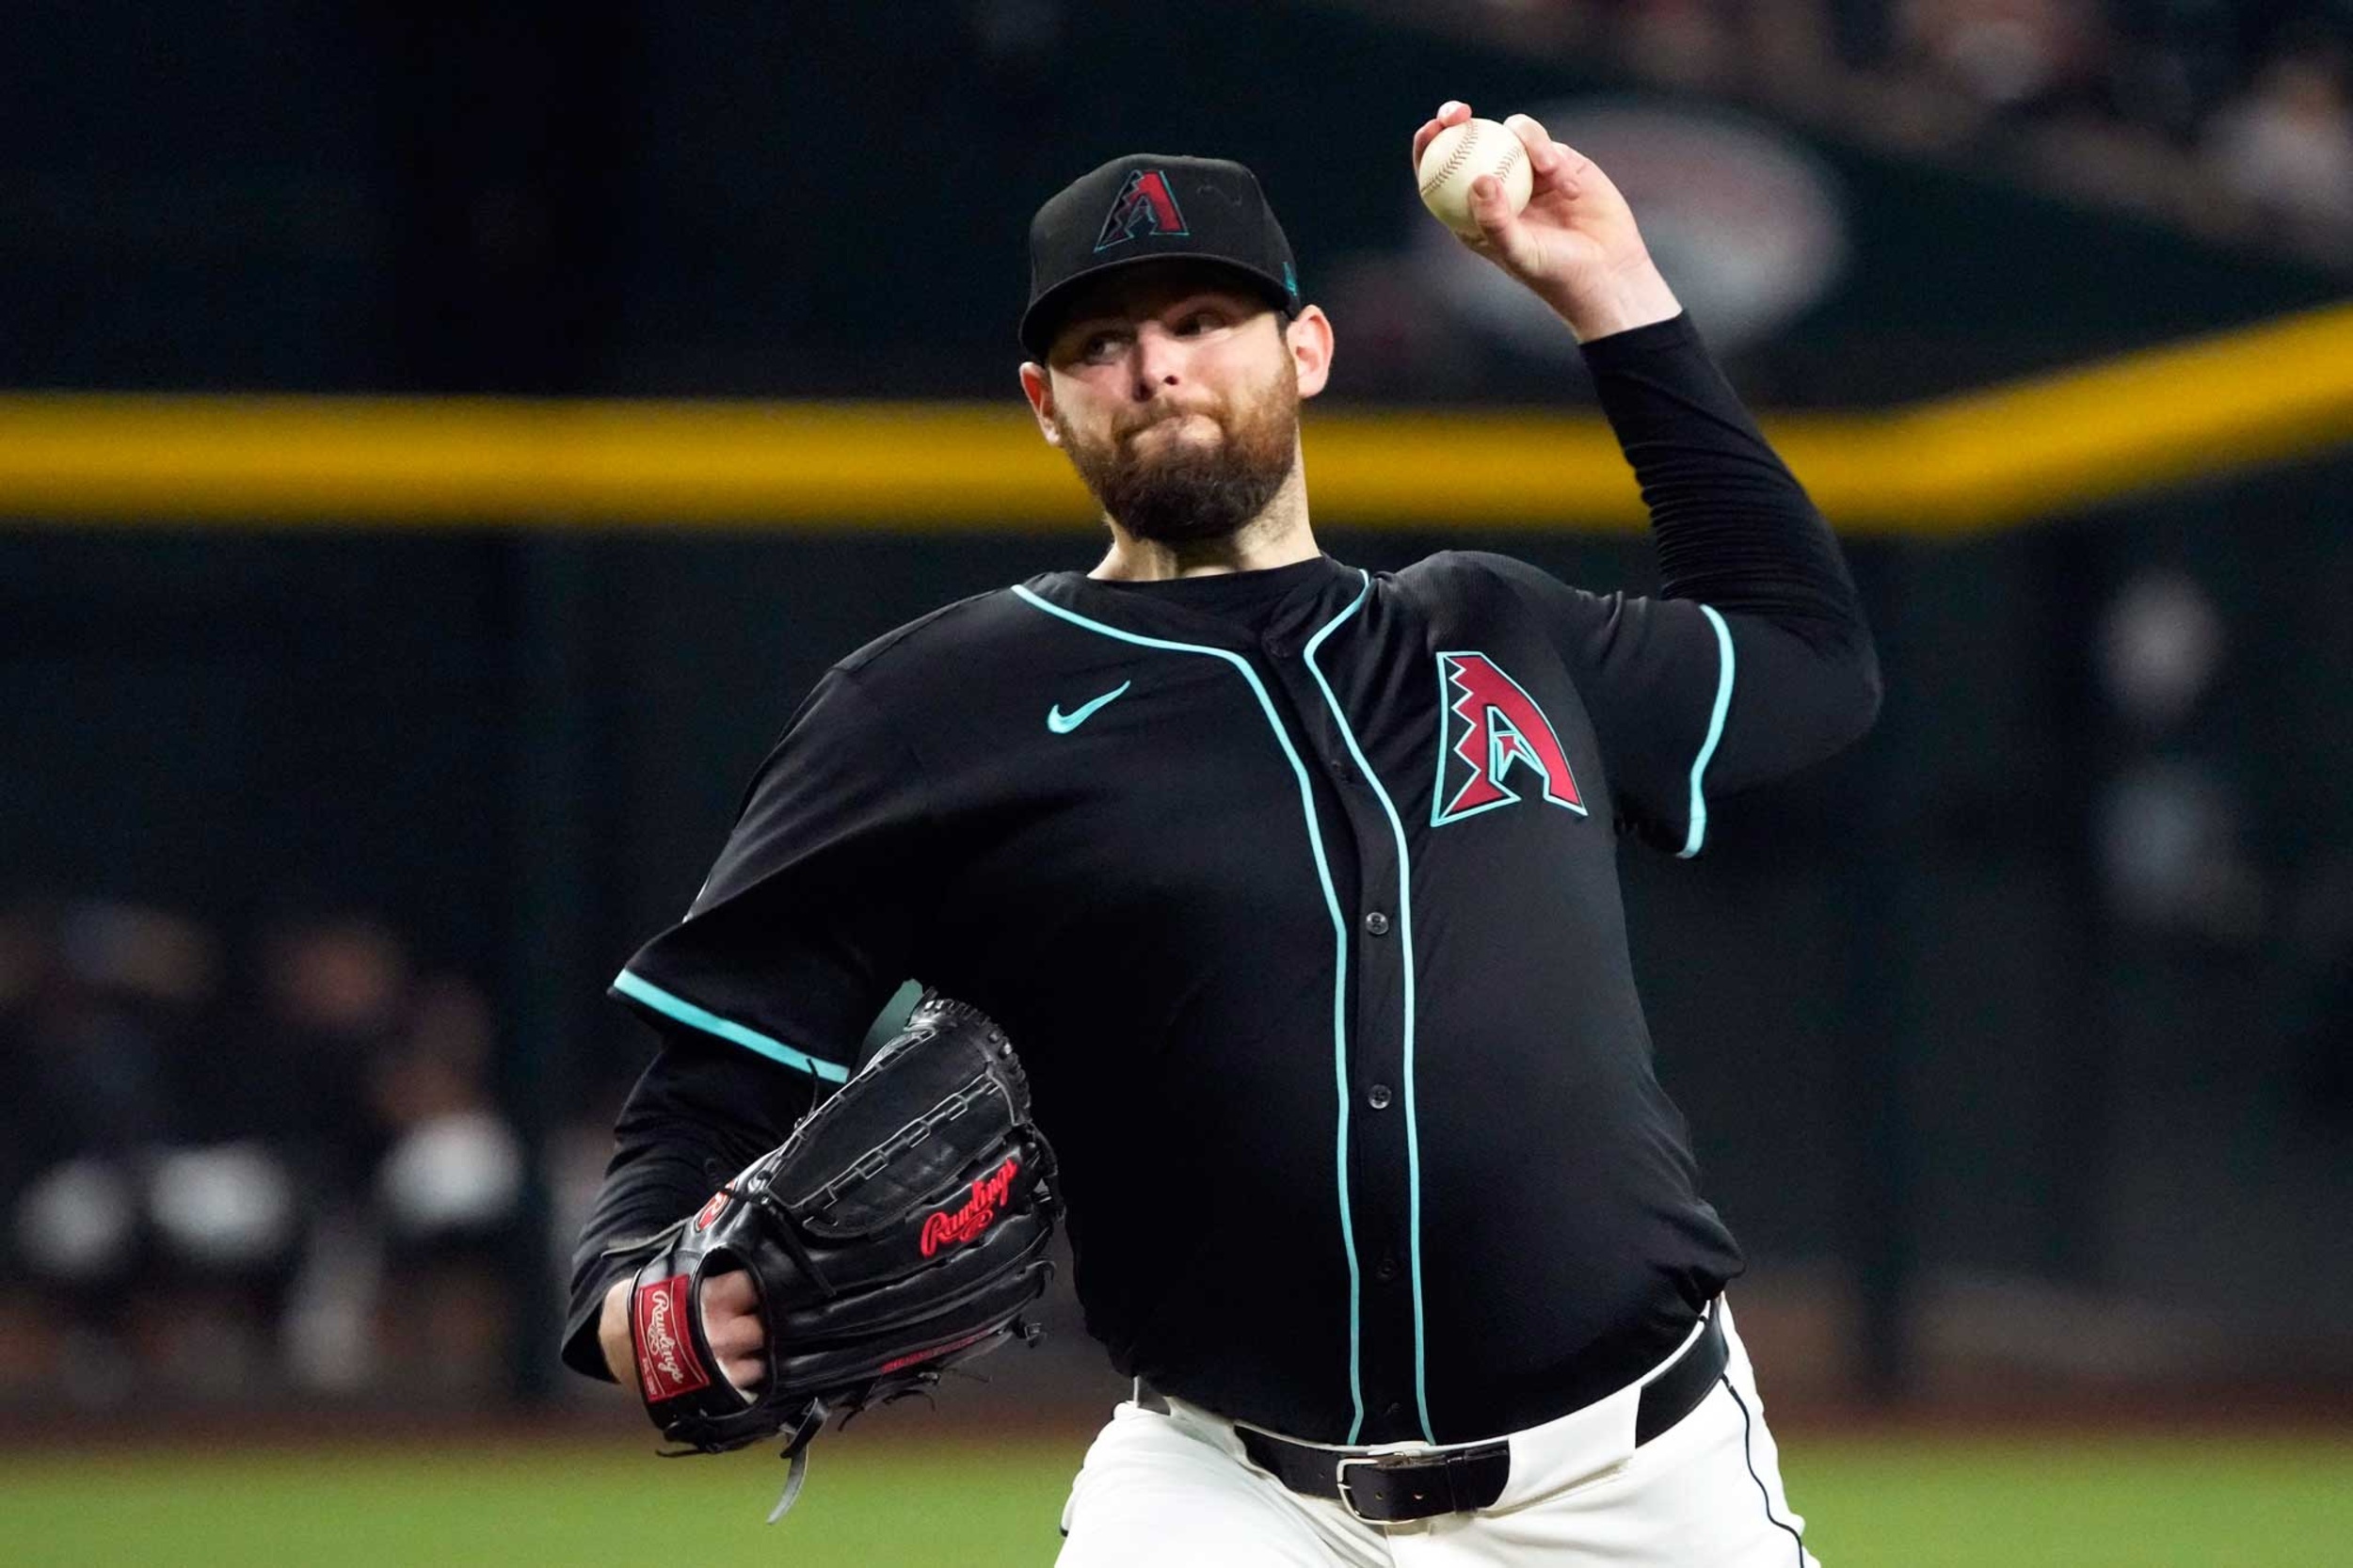 <p>Montgomery didn't sign until late in Spring Training while holding out for a big contract, and it looks like his bet was a mistake. The lefty hasn't been able to get outs for Arizona, posting a 6.80 ERA over nine starts.</p><p><a href='https://www.msn.com/en-us/community/channel/vid-cj9pqbr0vn9in2b6ddcd8sfgpfq6x6utp44fssrv6mc2gtybw0us'>Follow us on MSN to see more of our exclusive MLB content.</a></p>